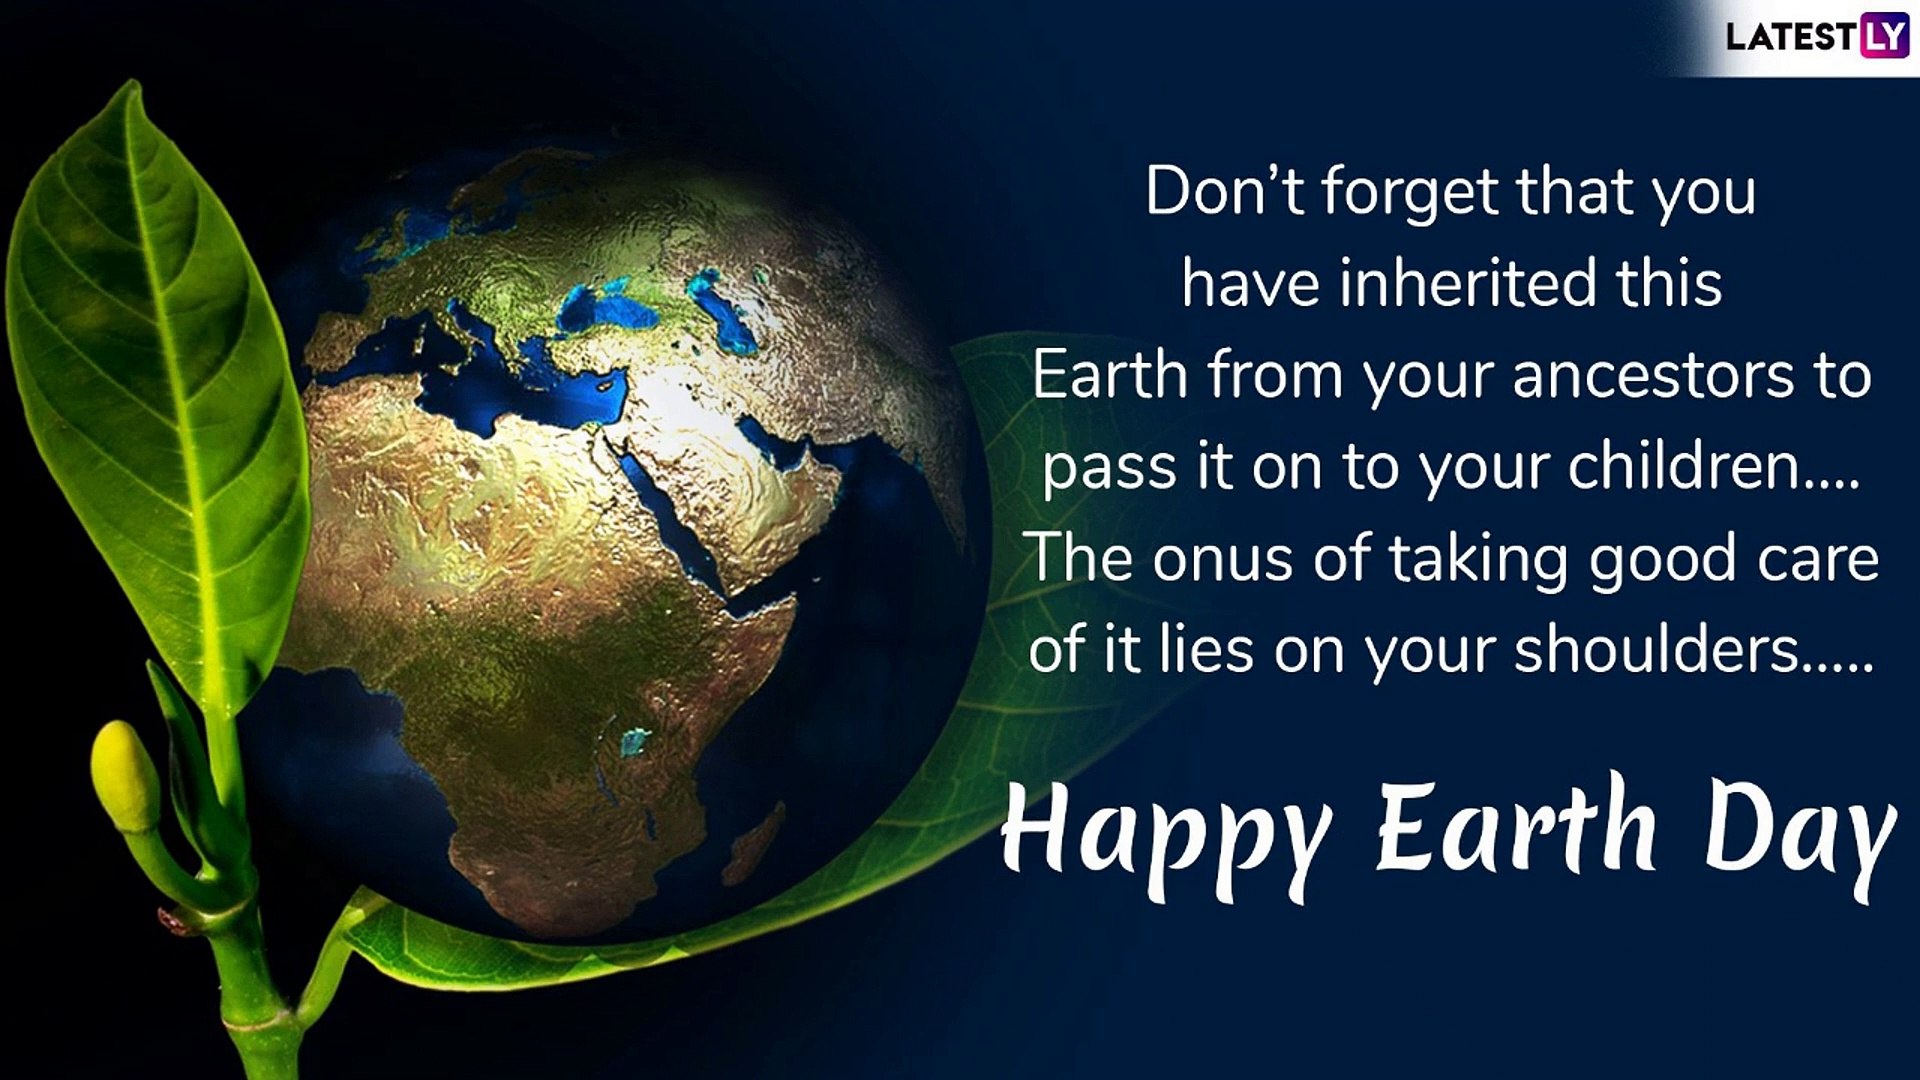 Earth Day 2019 Greetings: WhatsApp Pics & Quotes to Pass on Message of  Environmental Conservation